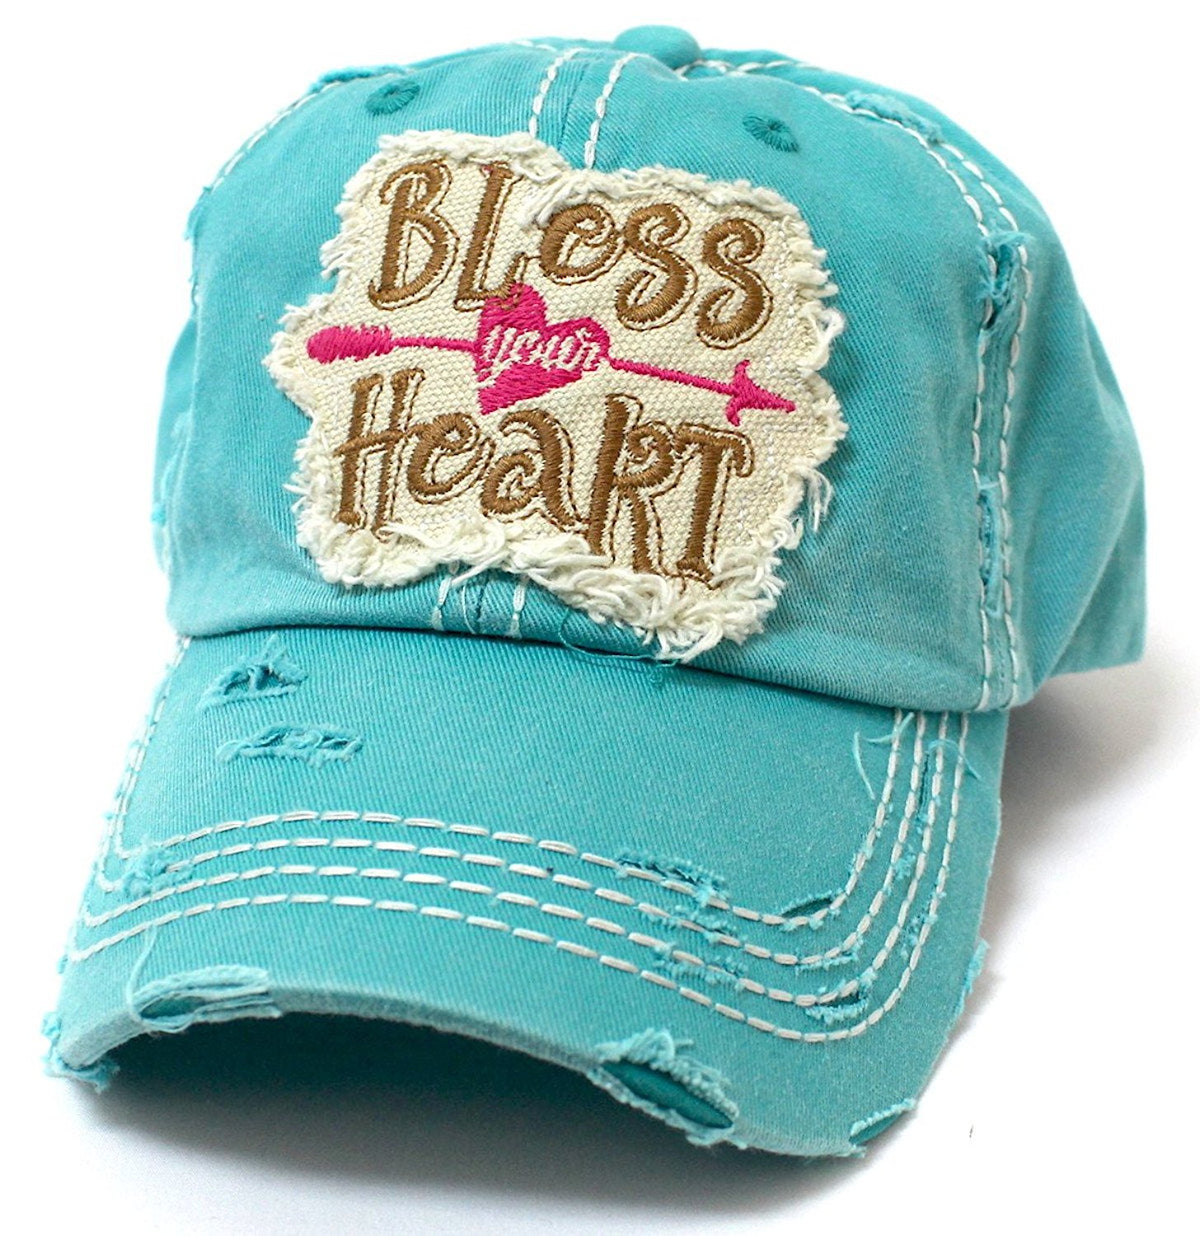 CAPS 'N VINTAGE New!! Women's Bless Your Heart Vintage Embroidery Baseball Hat-Turquoise - Caps 'N Vintage 